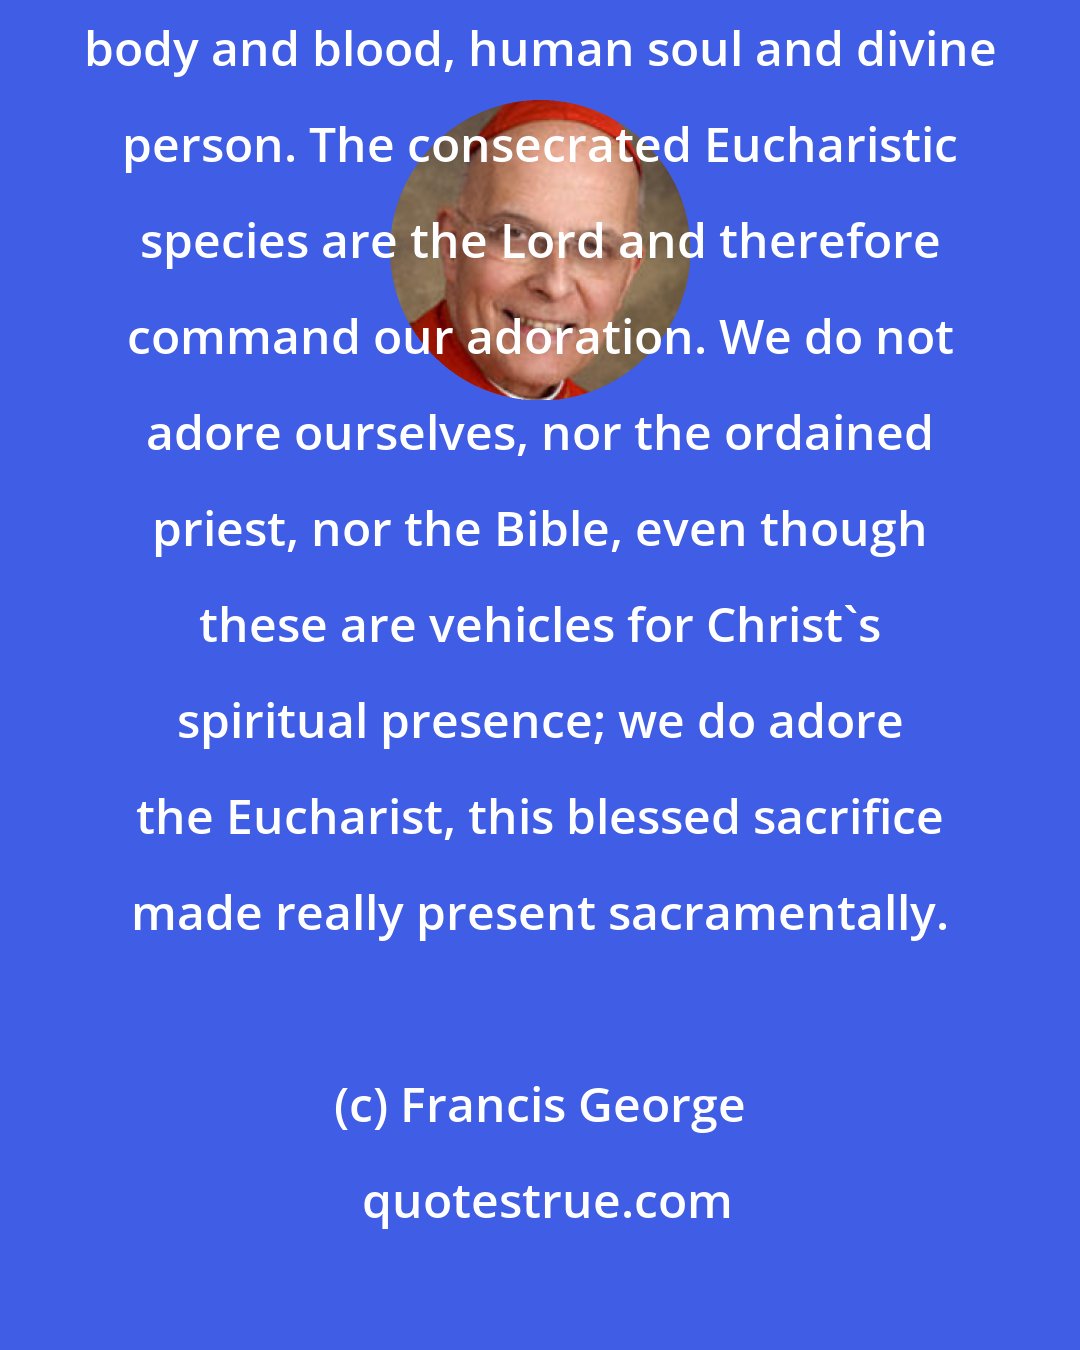 Francis George: This is a real presence which includes every dimension of who Jesus is: body and blood, human soul and divine person. The consecrated Eucharistic species are the Lord and therefore command our adoration. We do not adore ourselves, nor the ordained priest, nor the Bible, even though these are vehicles for Christ's spiritual presence; we do adore the Eucharist, this blessed sacrifice made really present sacramentally.